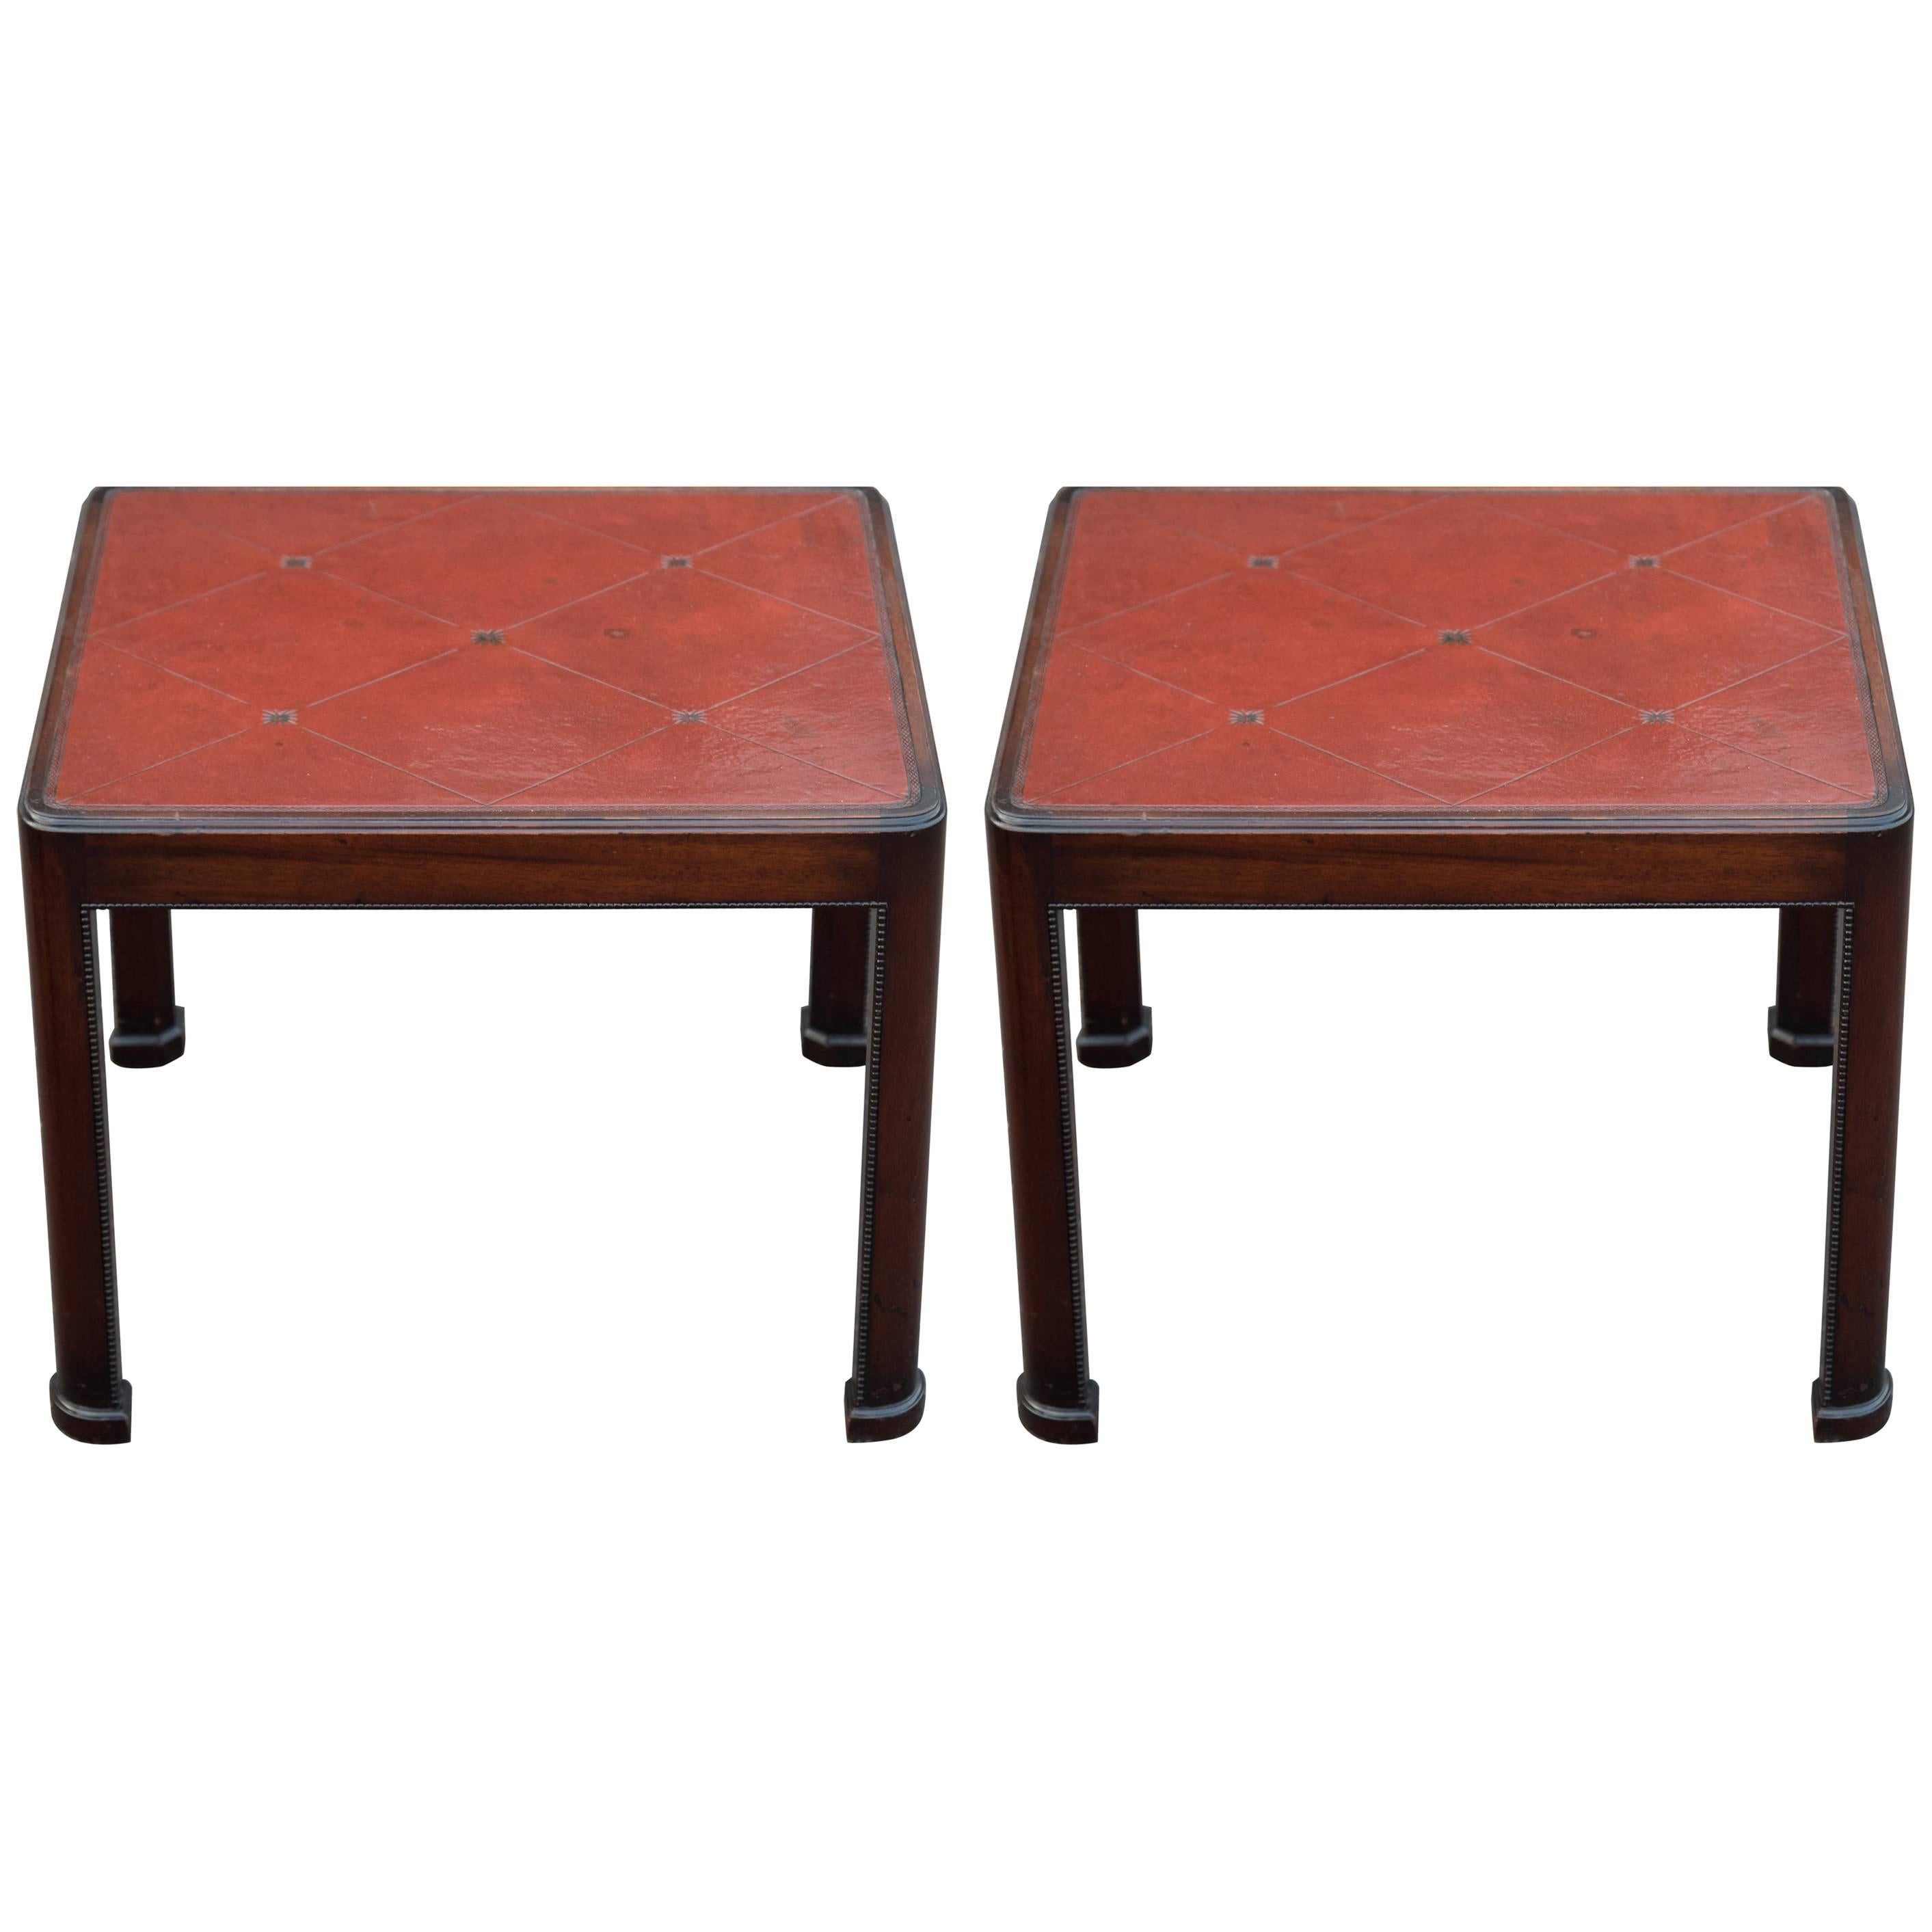 Stunning Pair of Tommi Parzinger for Charak Leather Top End Tables